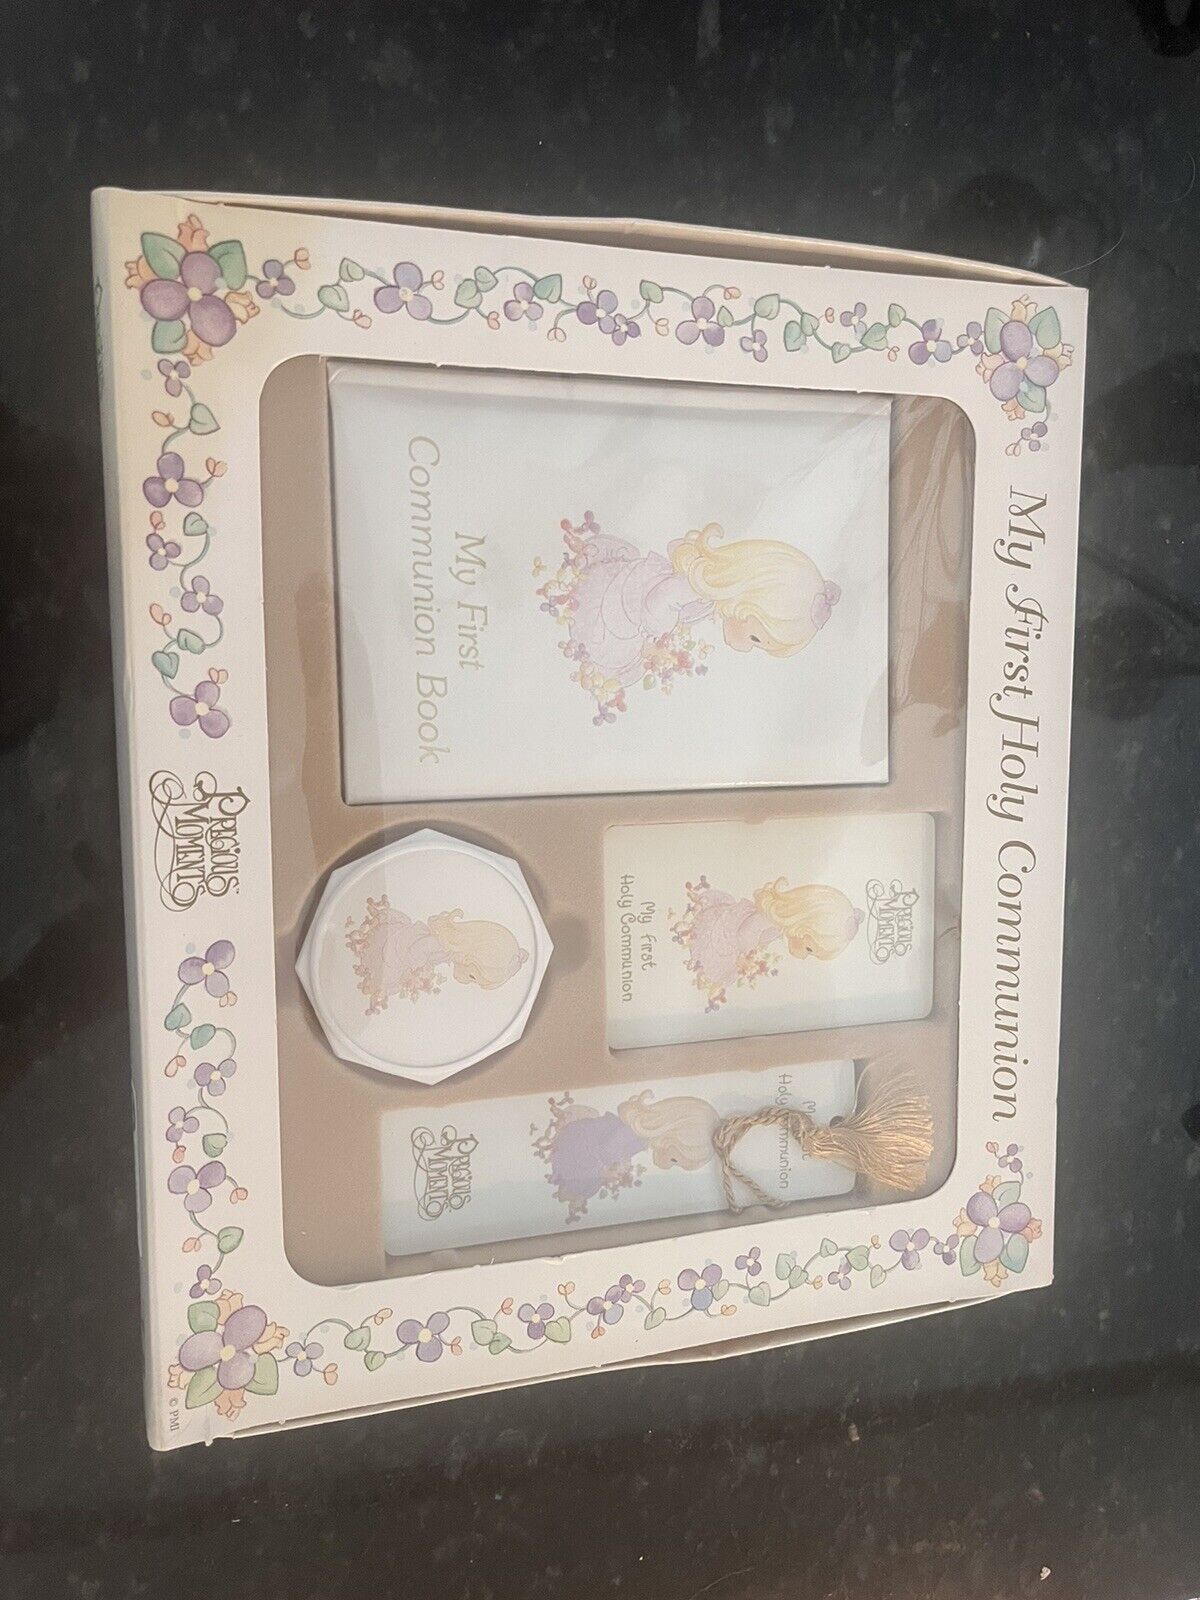 Precious Moments “My First Holy Communion” for Girl - Set 1993; Never Used